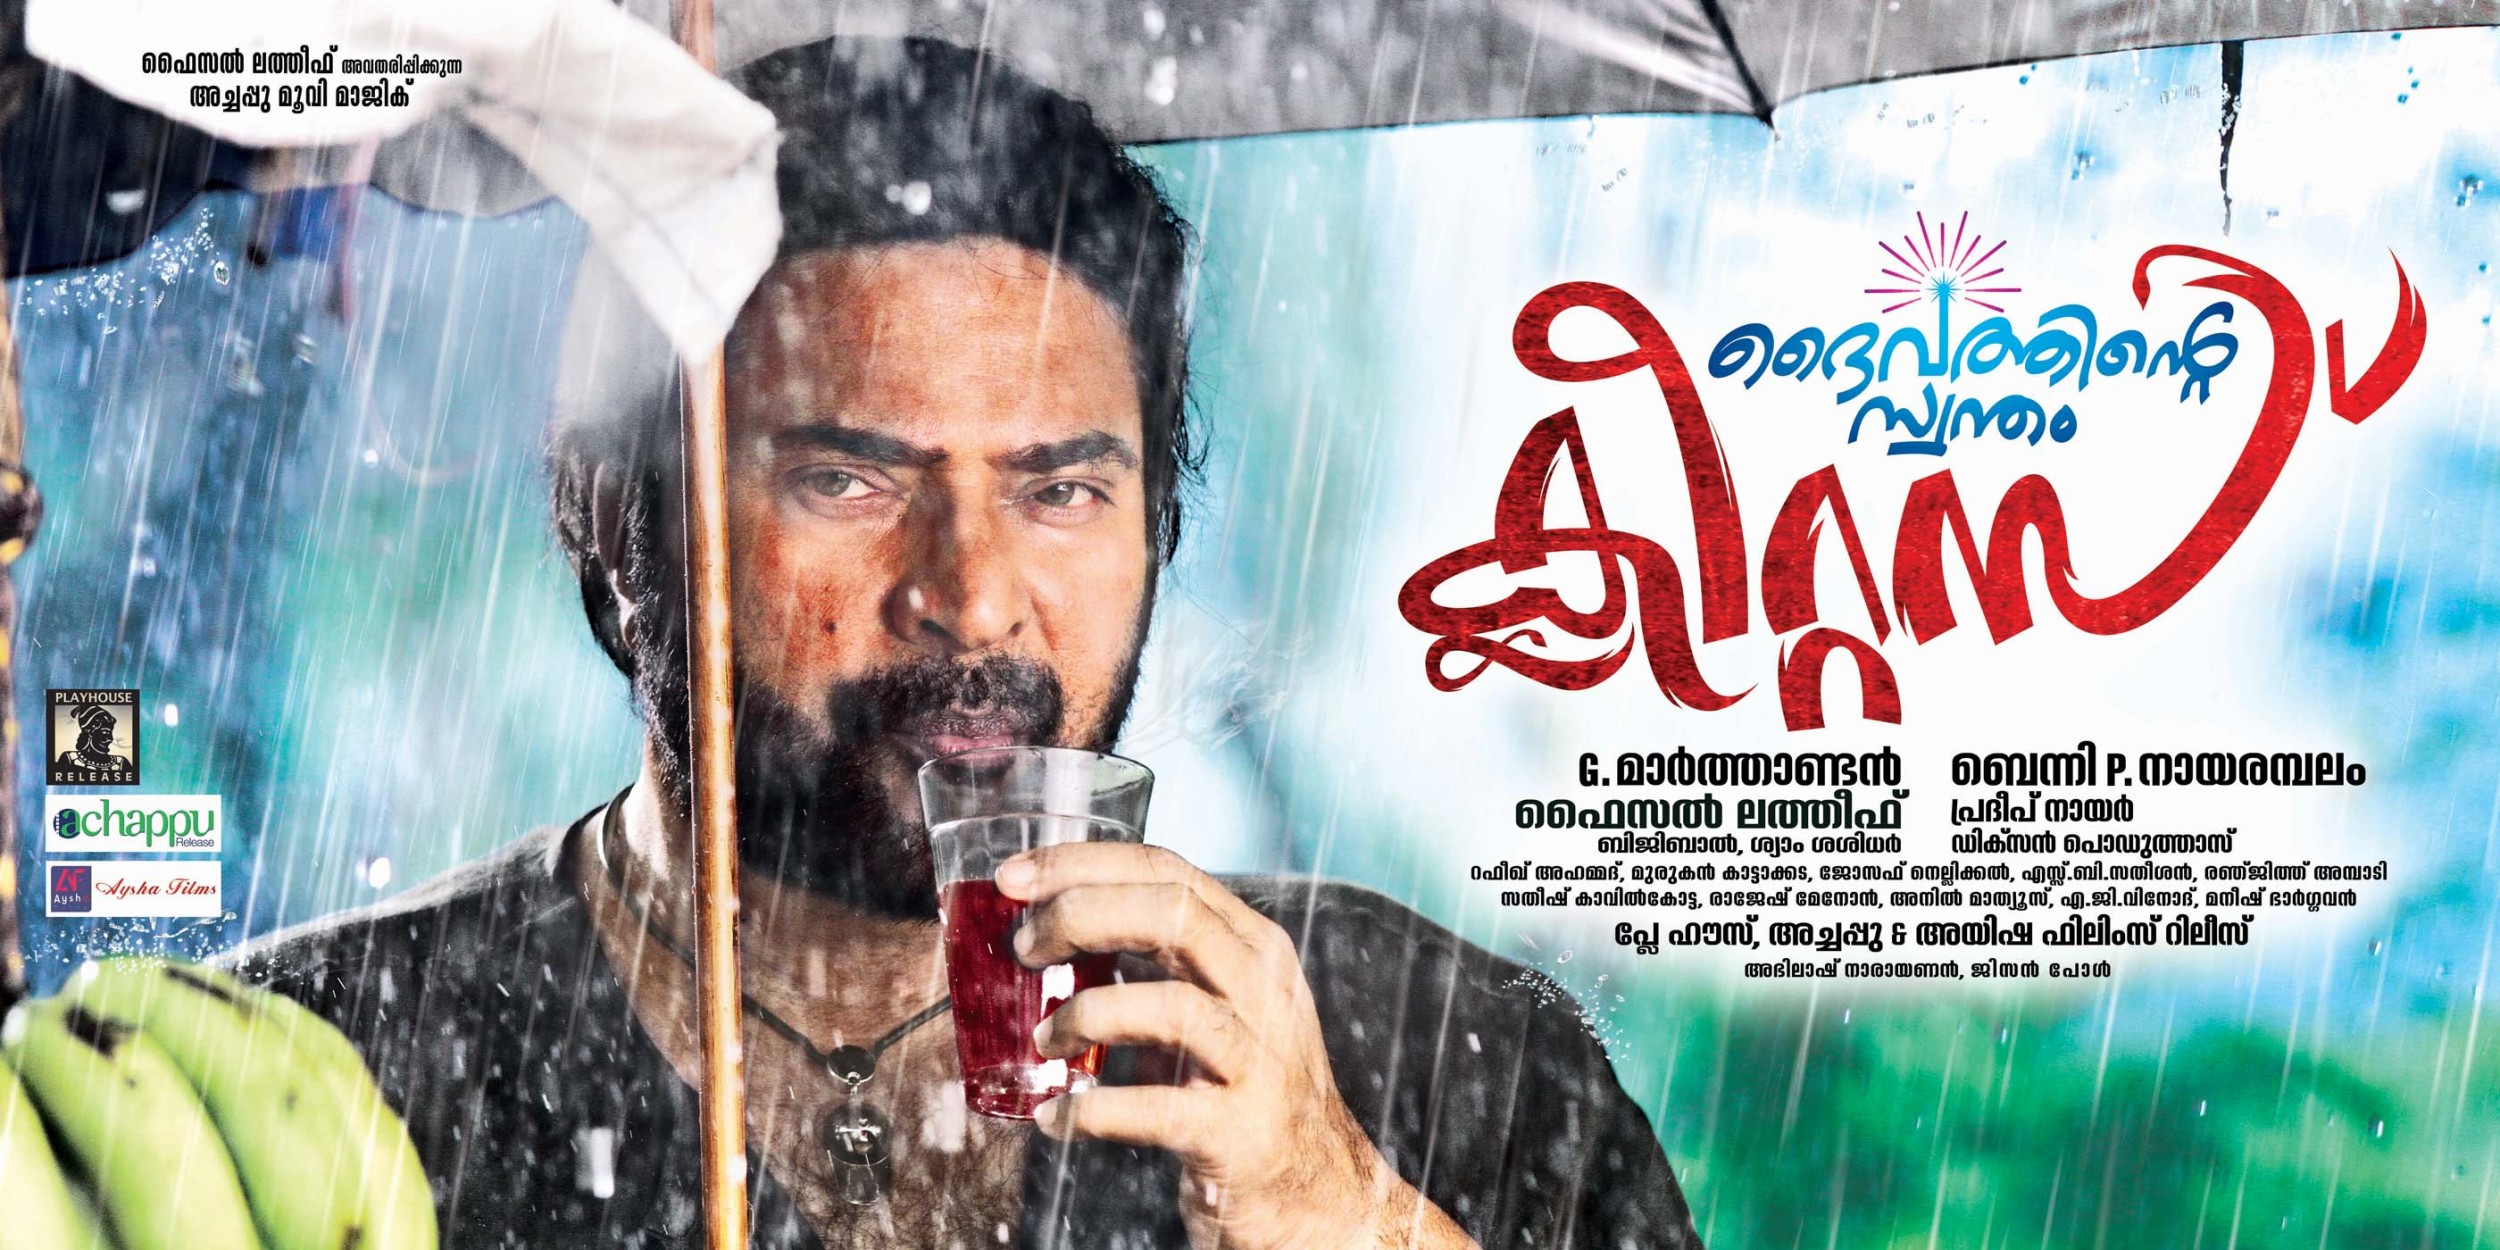 Mega Sized Movie Poster Image for Daivathinte Swantham Cleetus (#2 of 2)